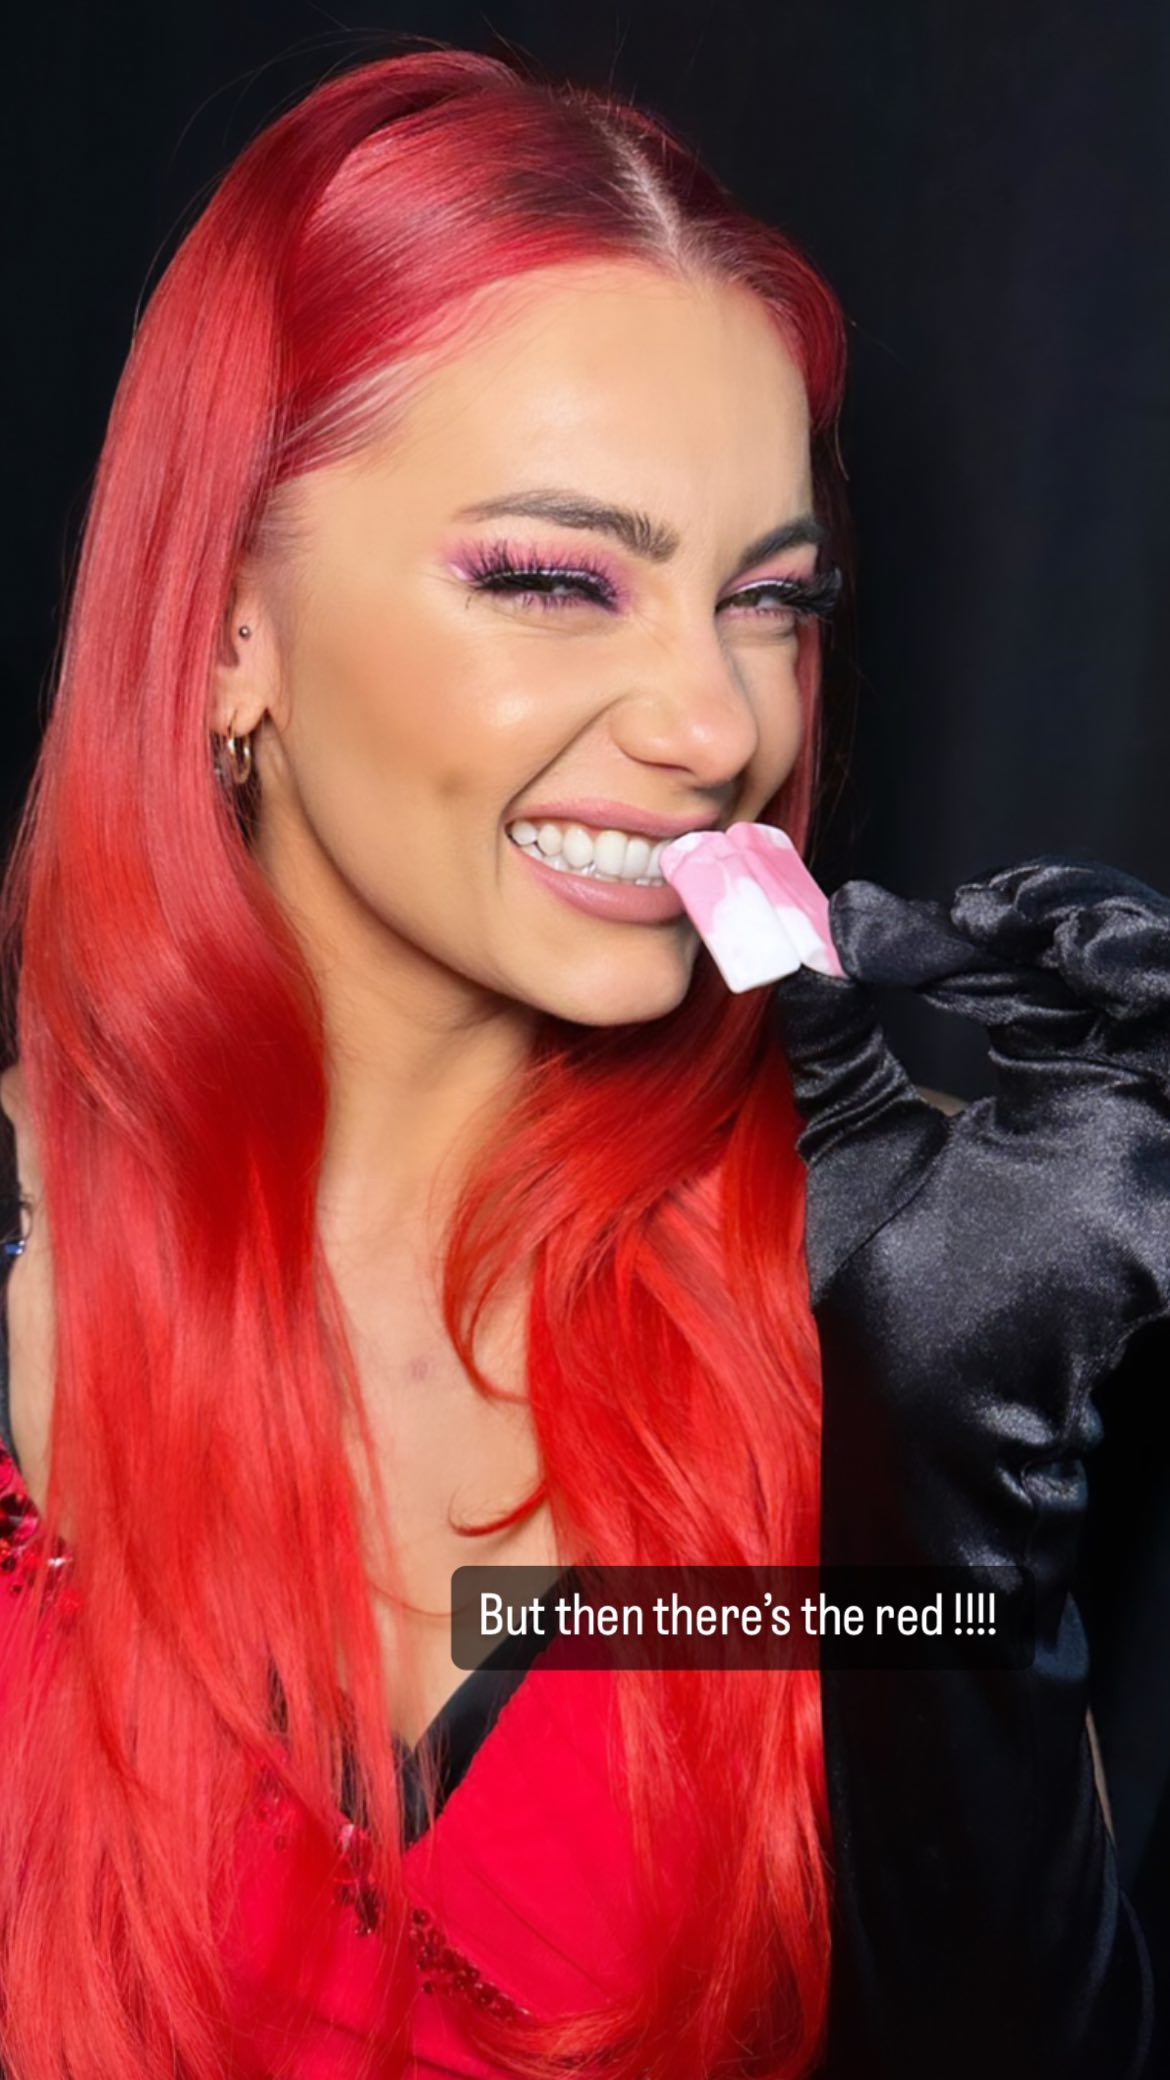 Strictly Come Dancing’s Dianne Buswell almost unrecognisable without her iconic red hair